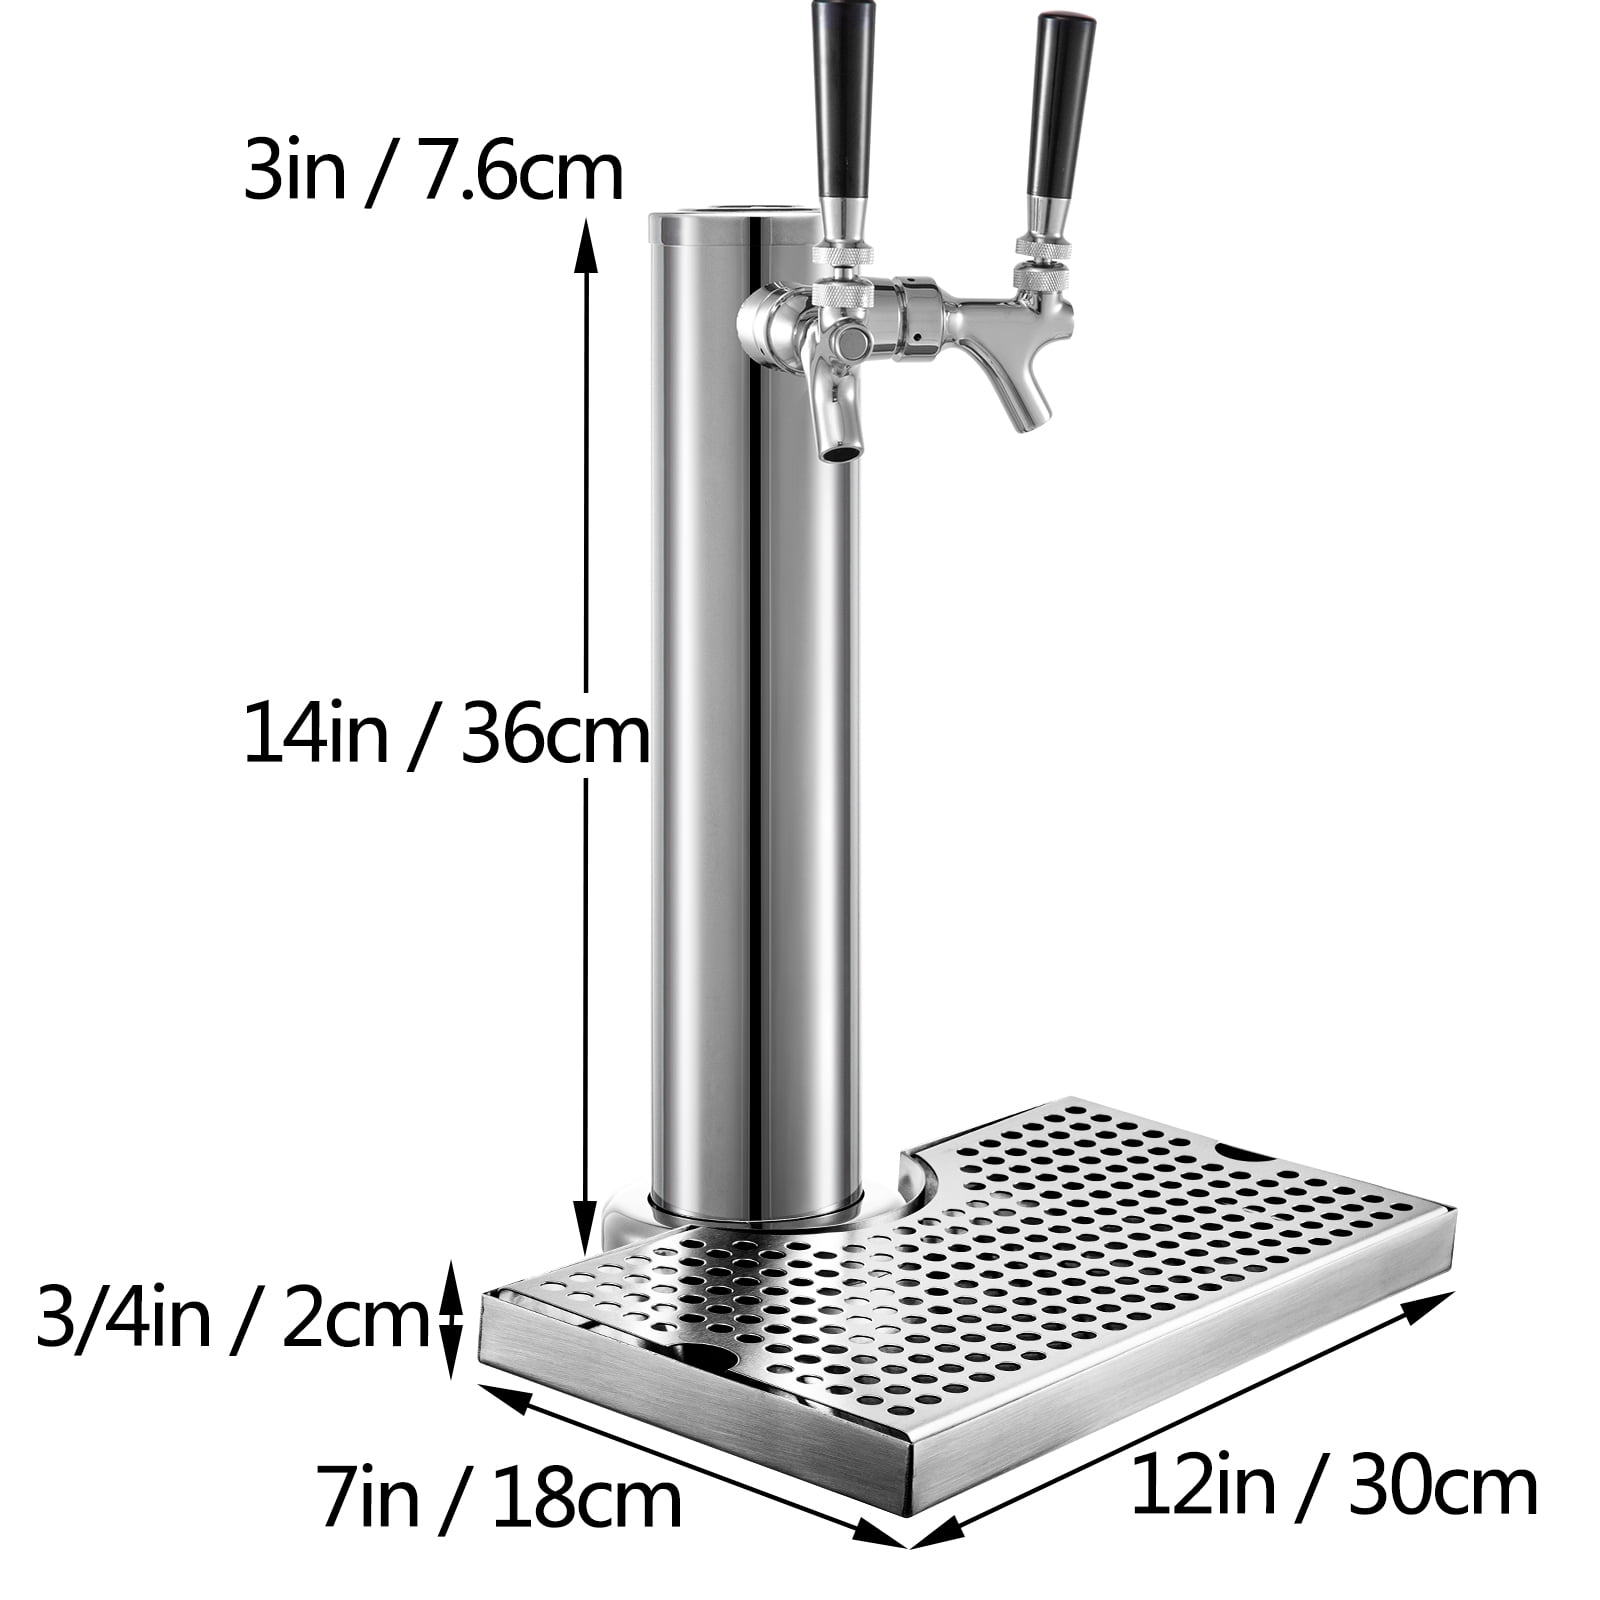 3 Kegerator Tower FERRODAY Dual Faucet Draft Beer Tower Double Faucet Tap Beer Tower Dispenser Double Beer Tap Chrome Plated Stainless Steel Core Faucet Beer Tower Pre-assembled Lines for Homebrew